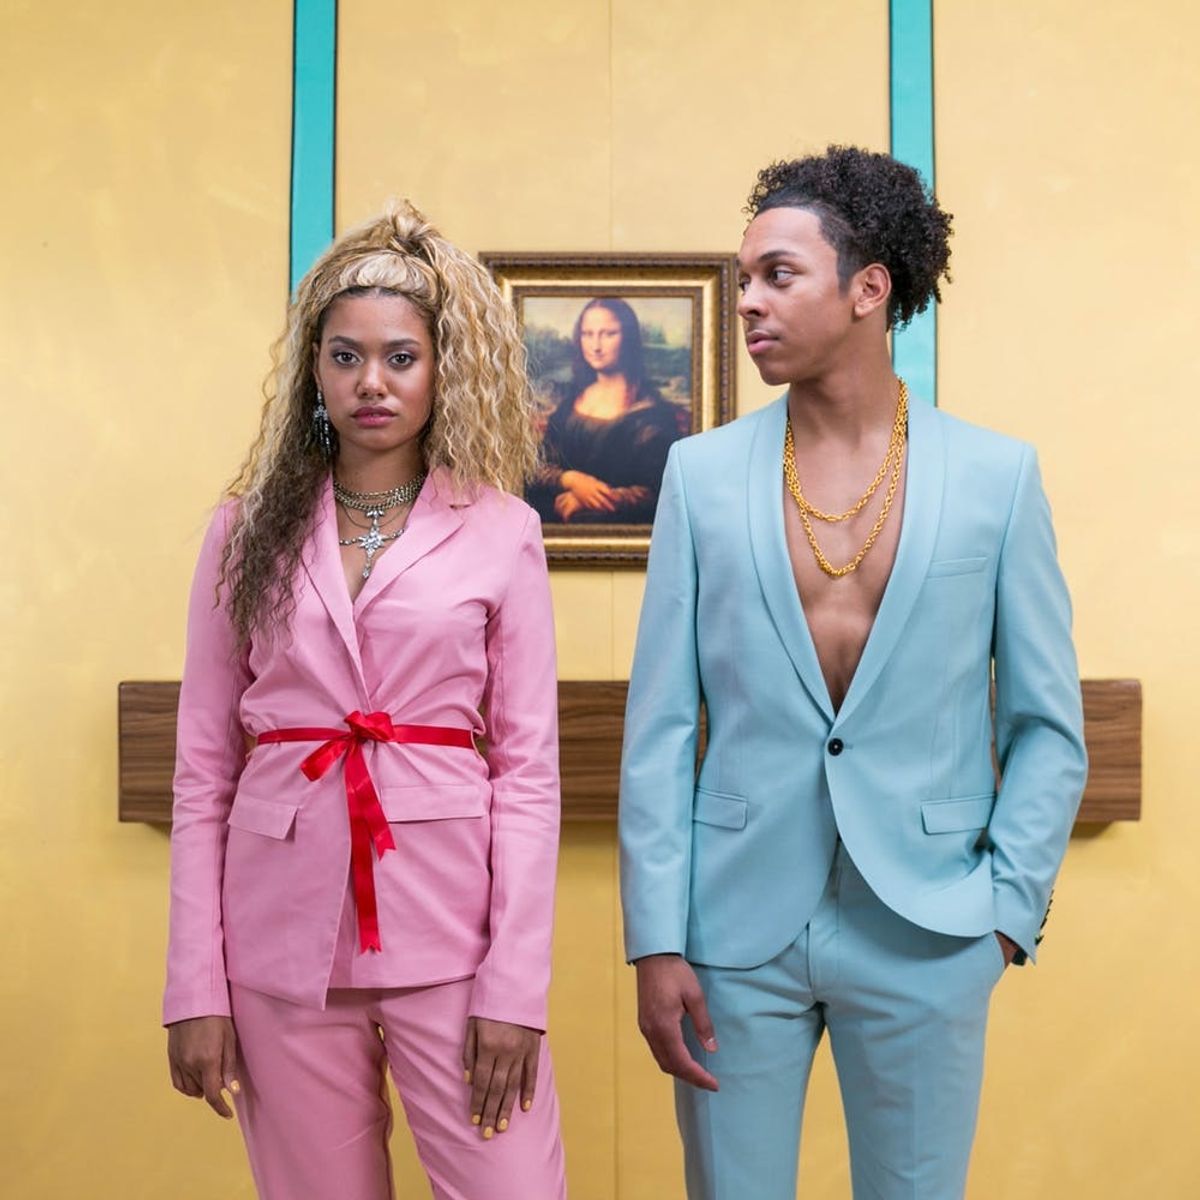 Slay Like Beyonce and Jay-Z in This Epic Halloween Couples Costume